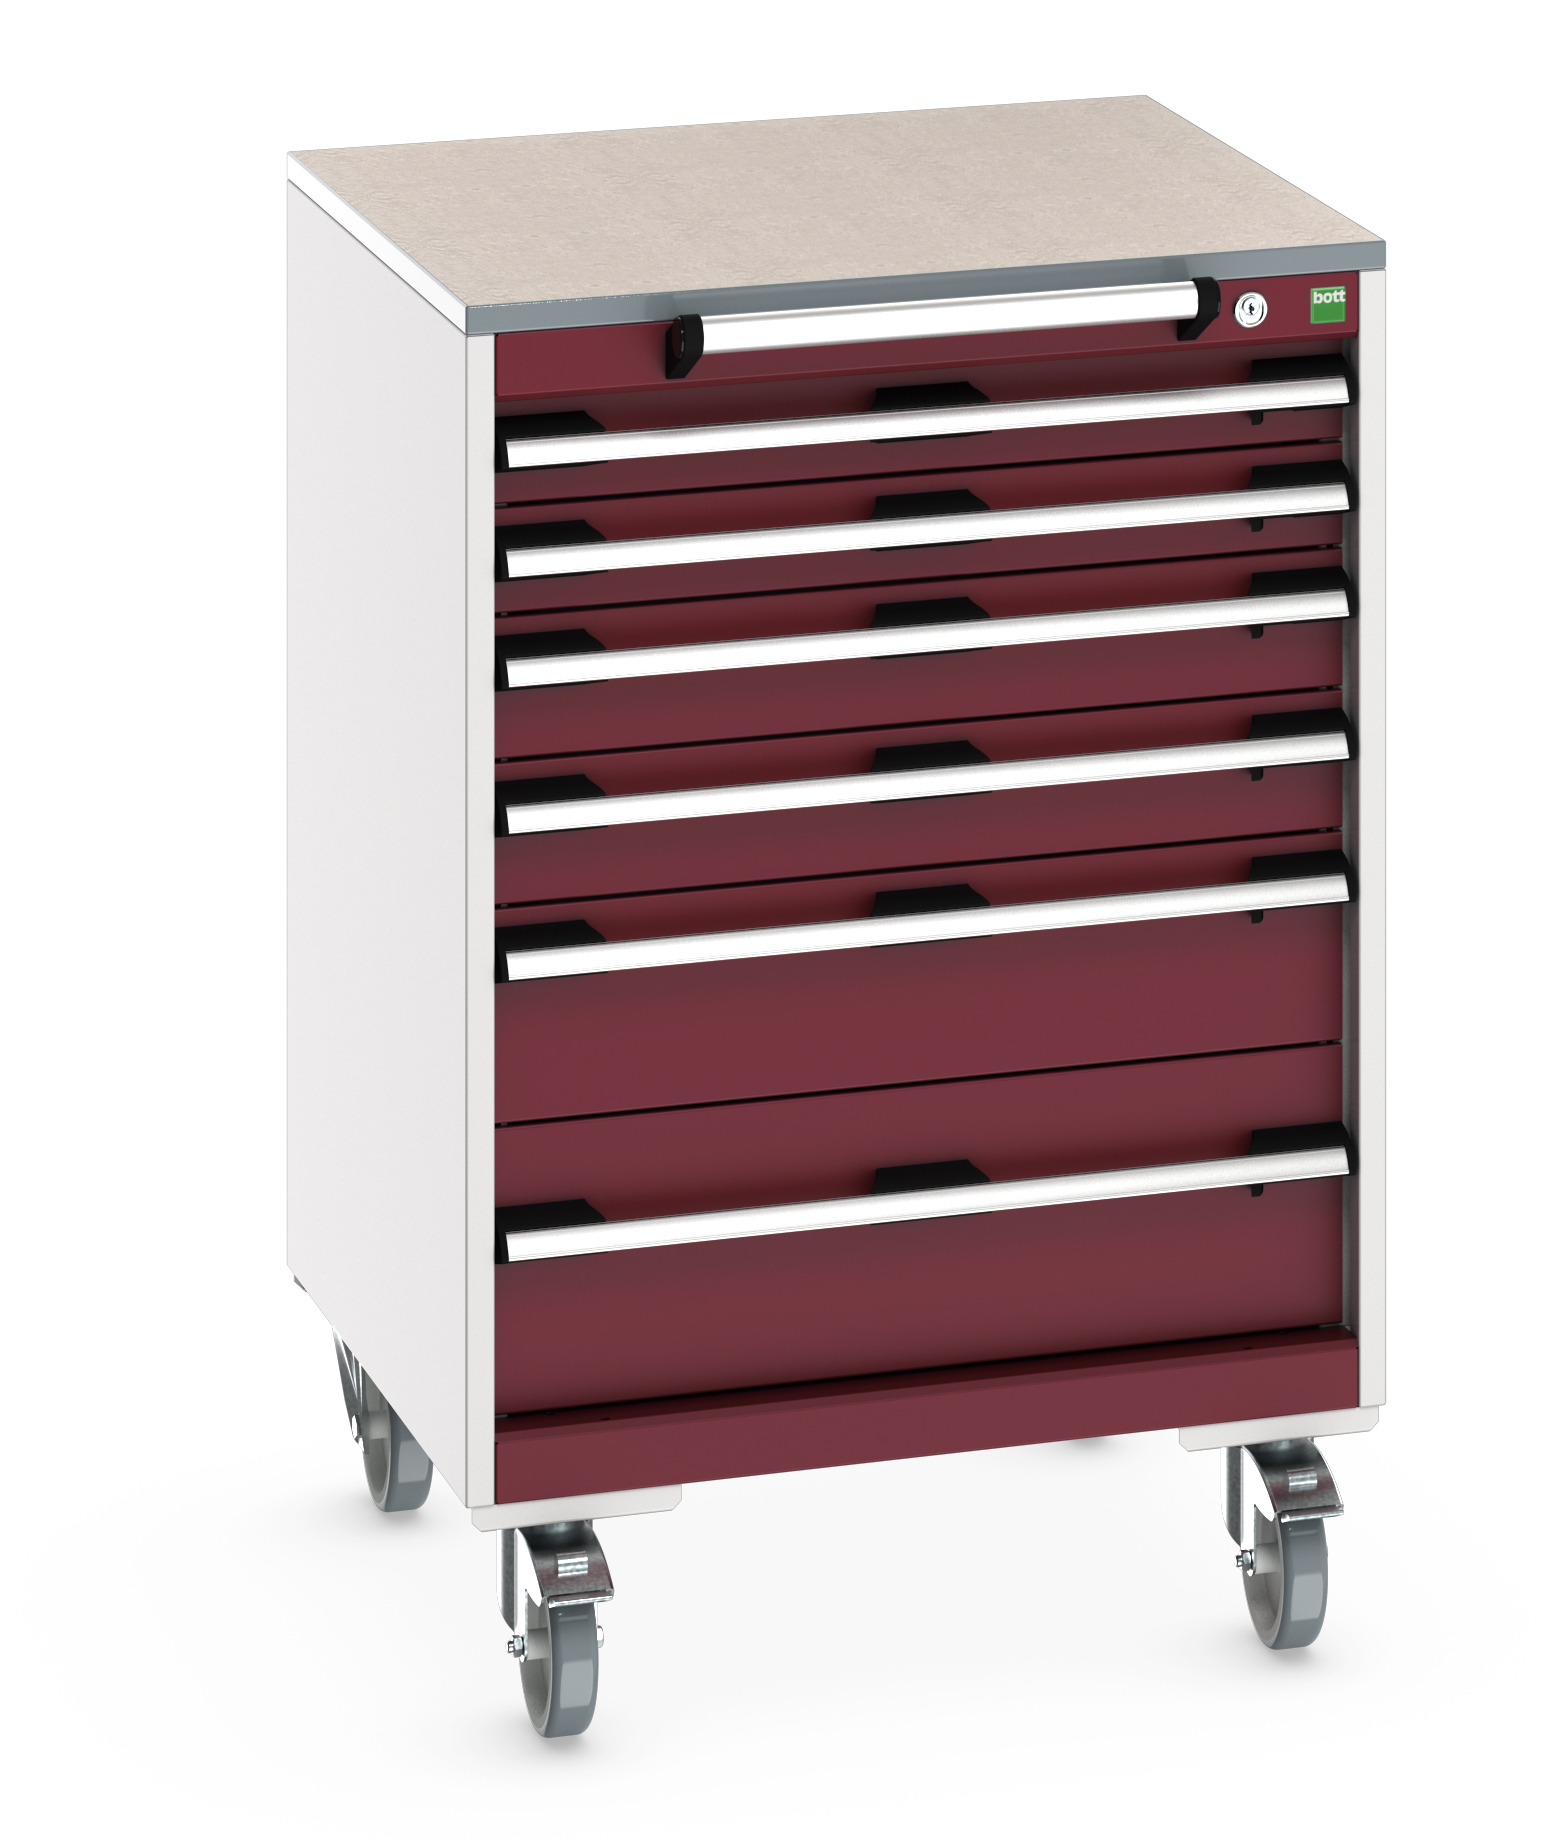 Bott Cubio Mobile Drawer Cabinet With 6 Drawers & Lino Worktop - 40402152.24V